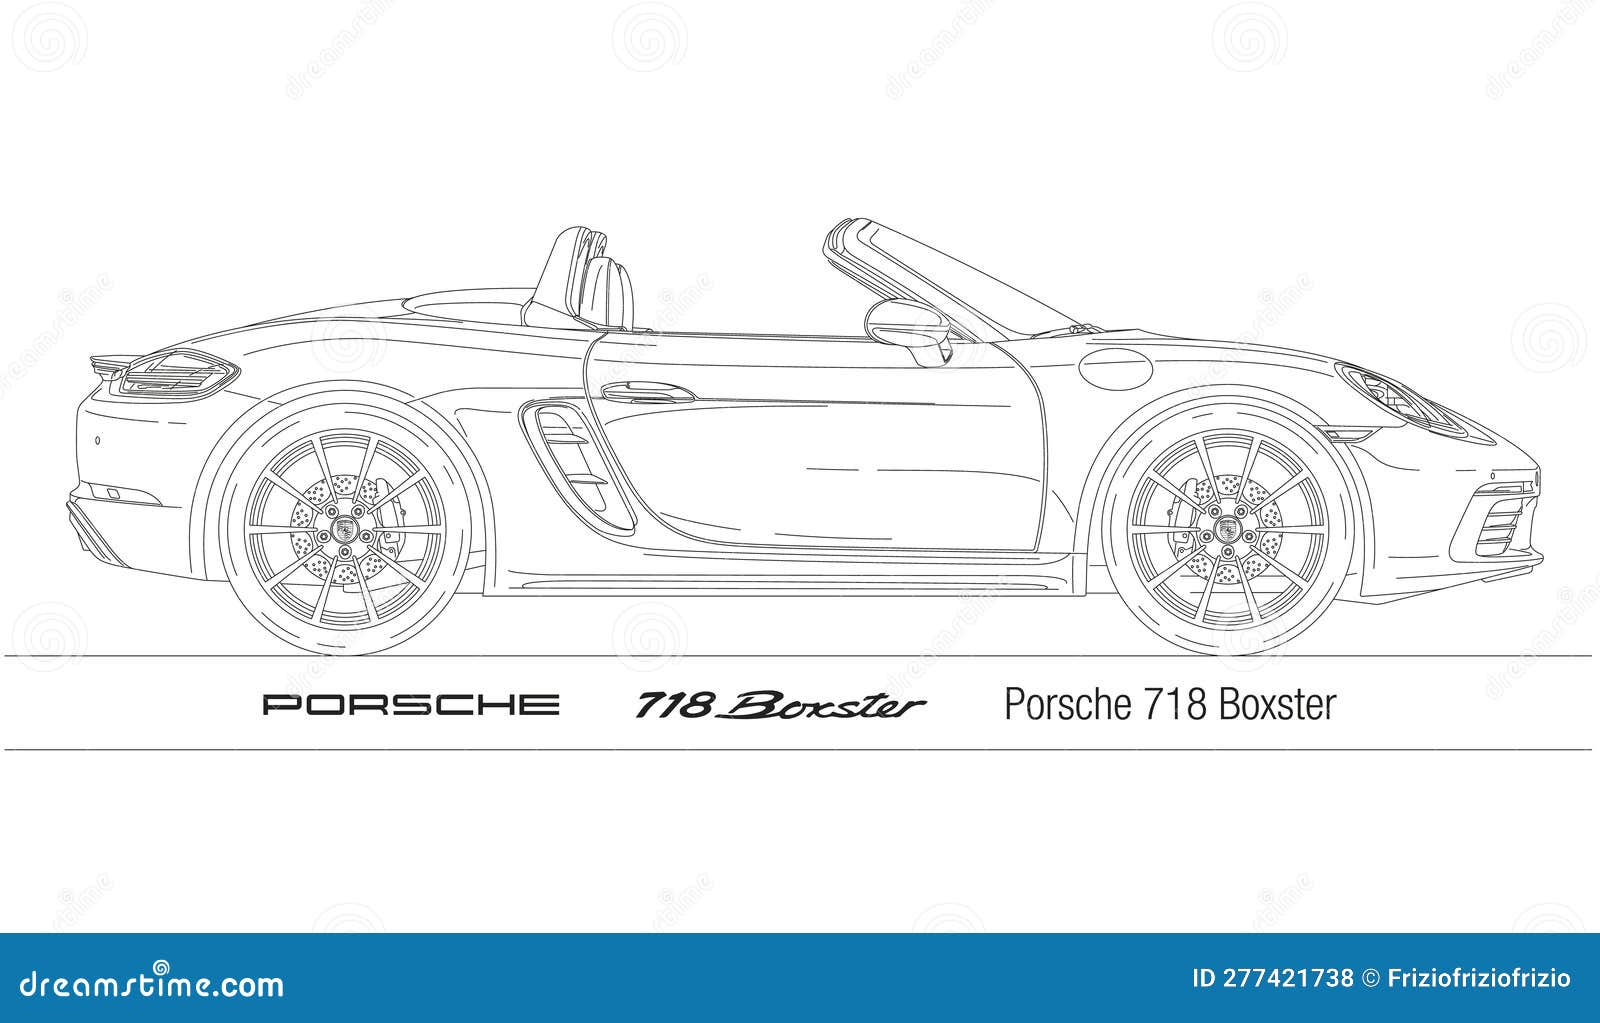 How to draw Porsche 918 Spyder  Supercars  Sketchok easy drawing guides